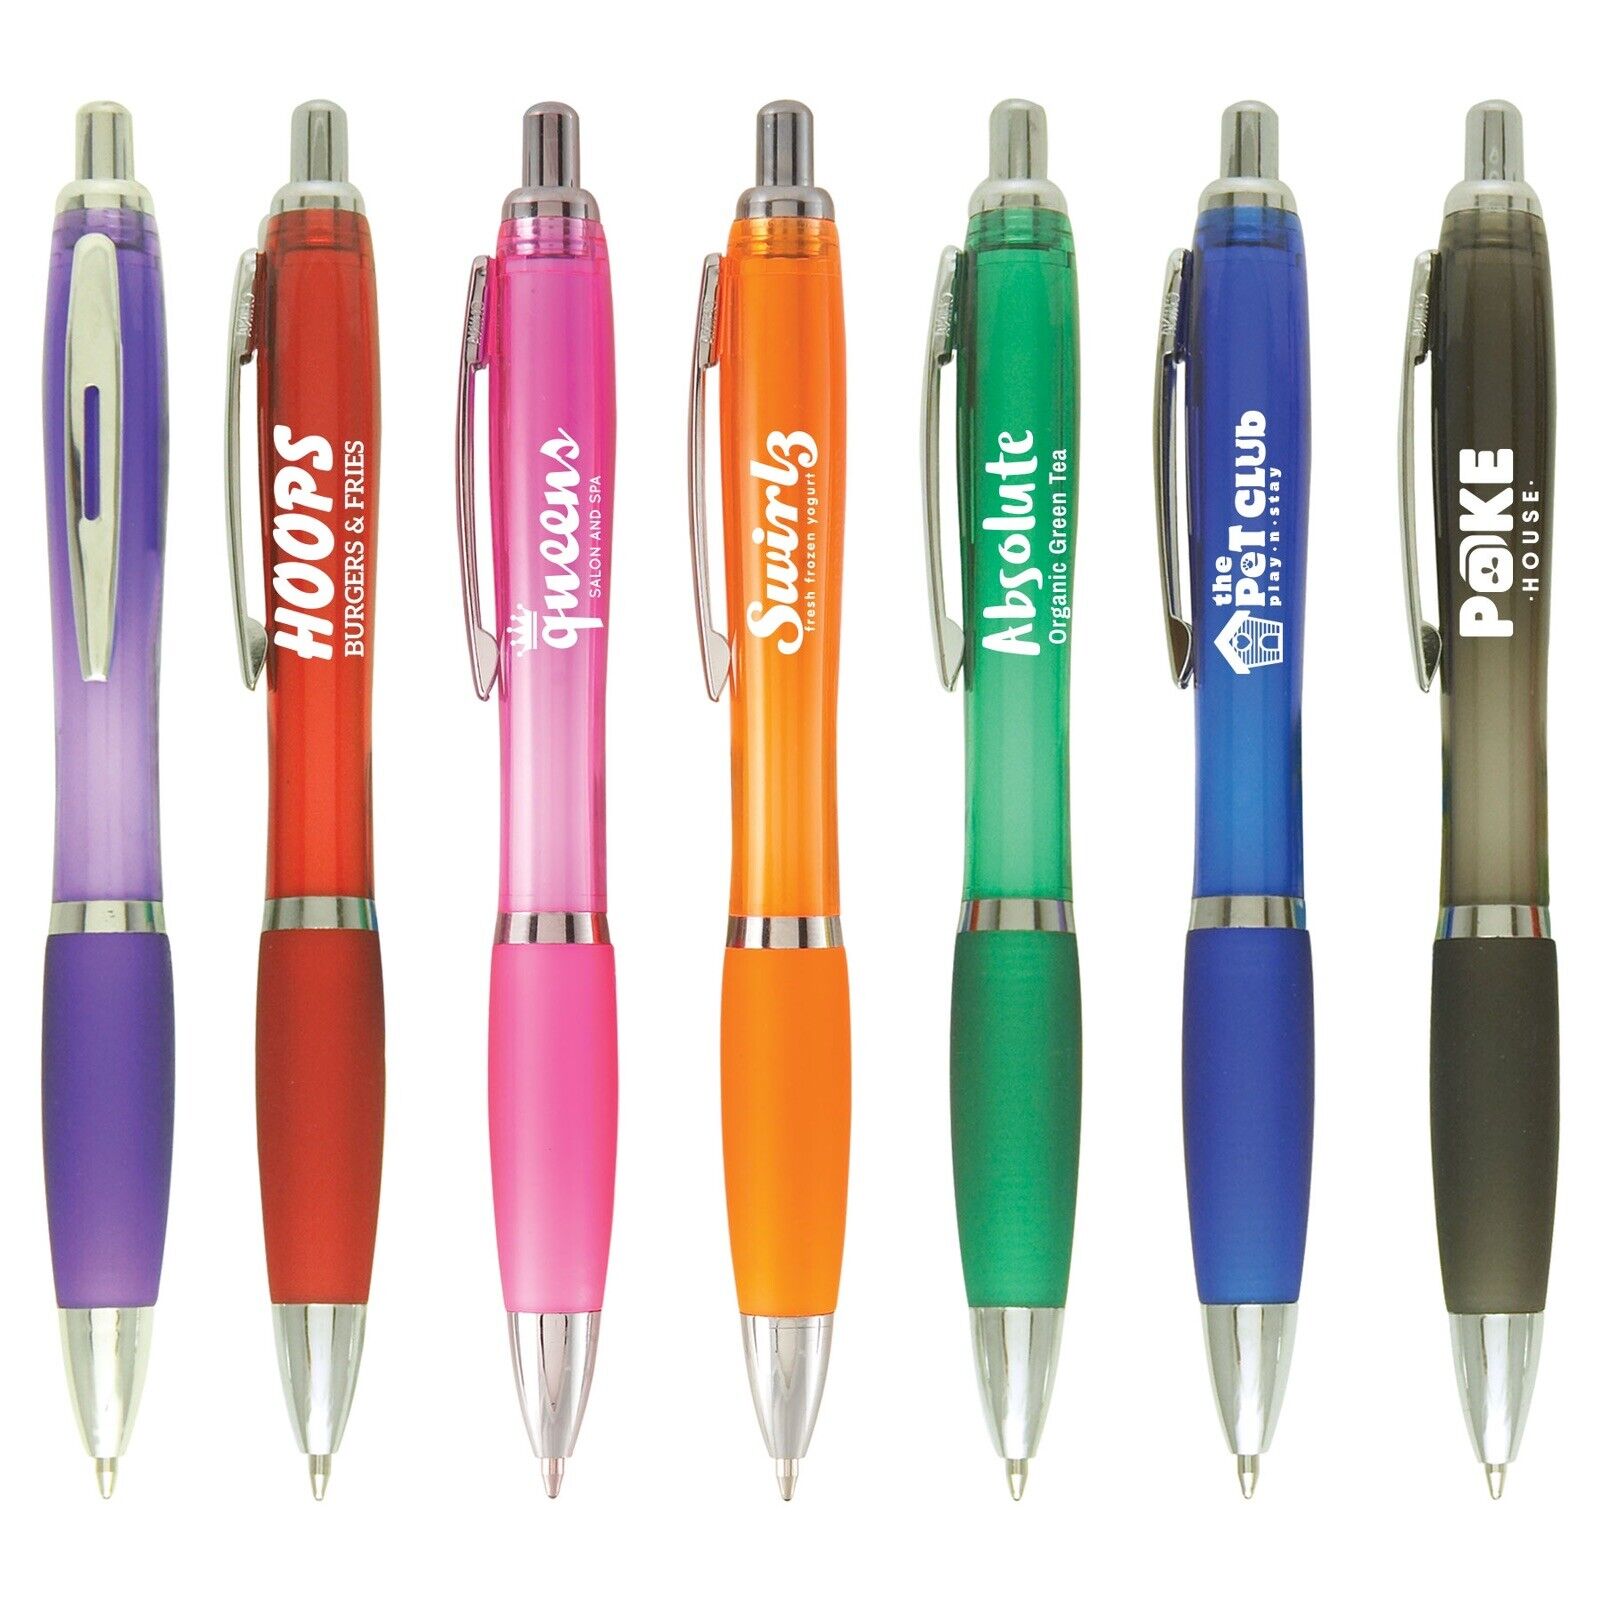 Personalized Pens Imprinted W/ Company Name / Logo / Text  In 1 Color / 250 QTY